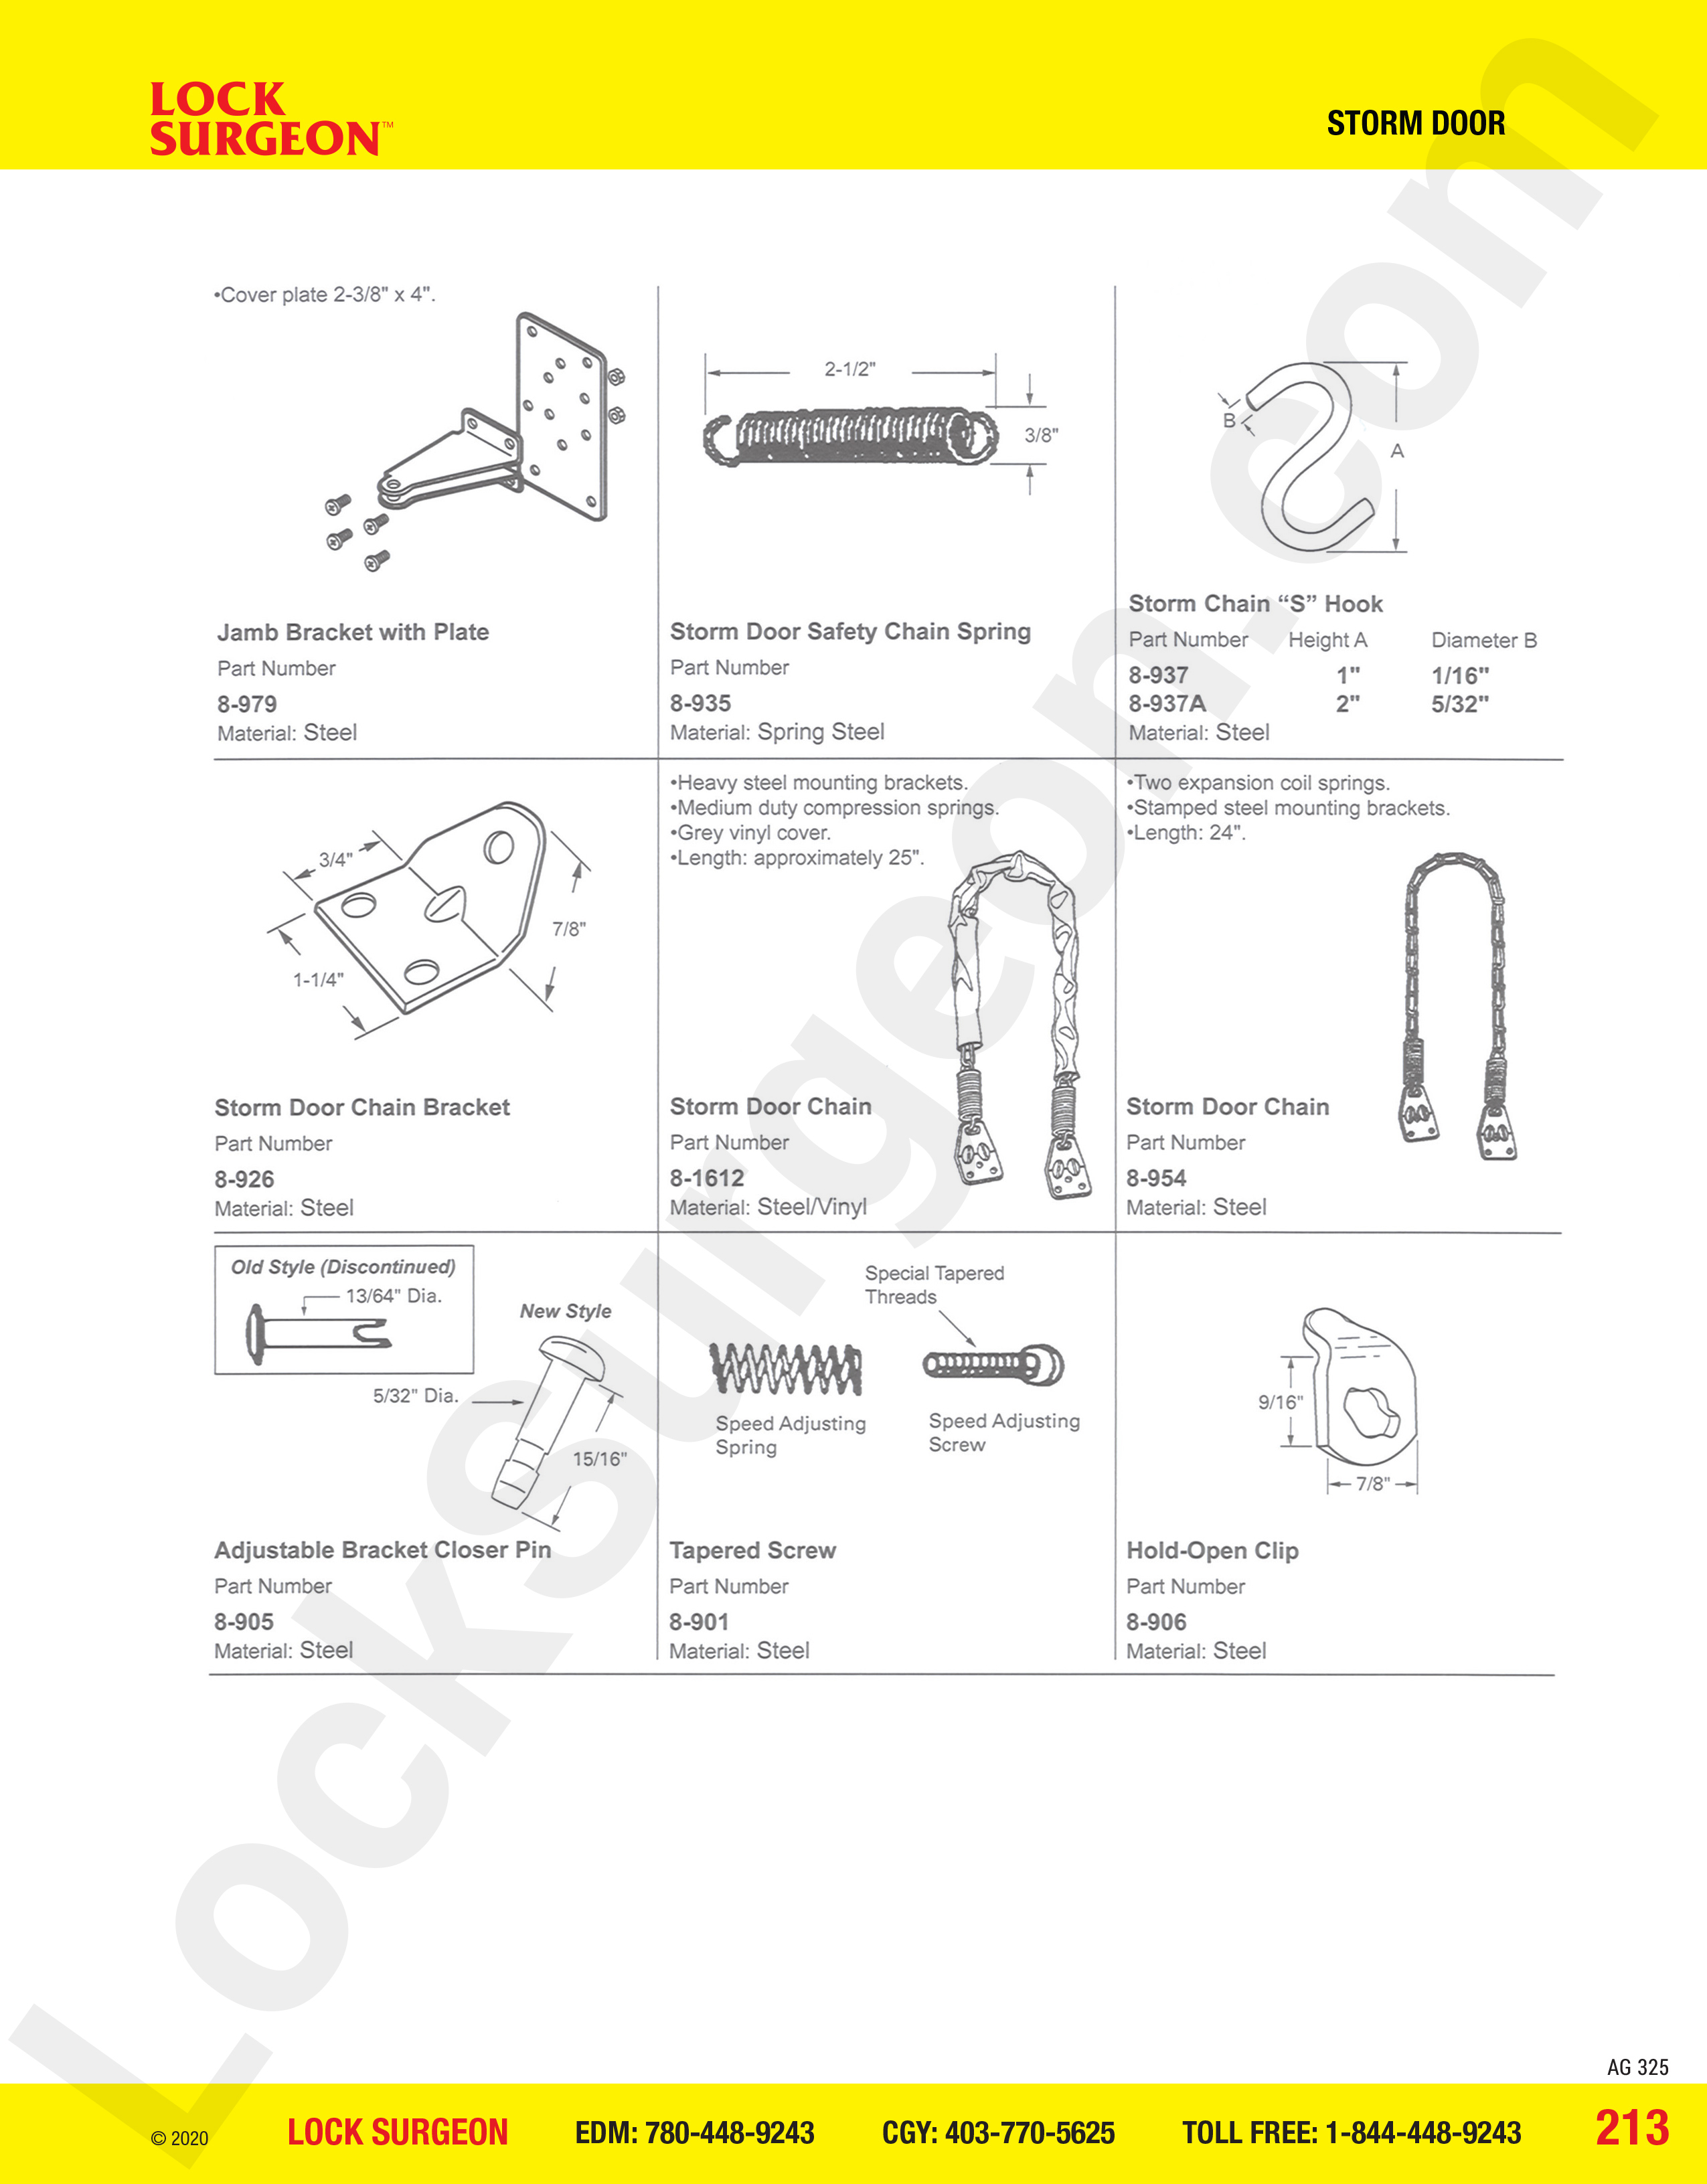 Storm Door brackets and chains jamb brackets with plate safety chain springs storm chain hooks